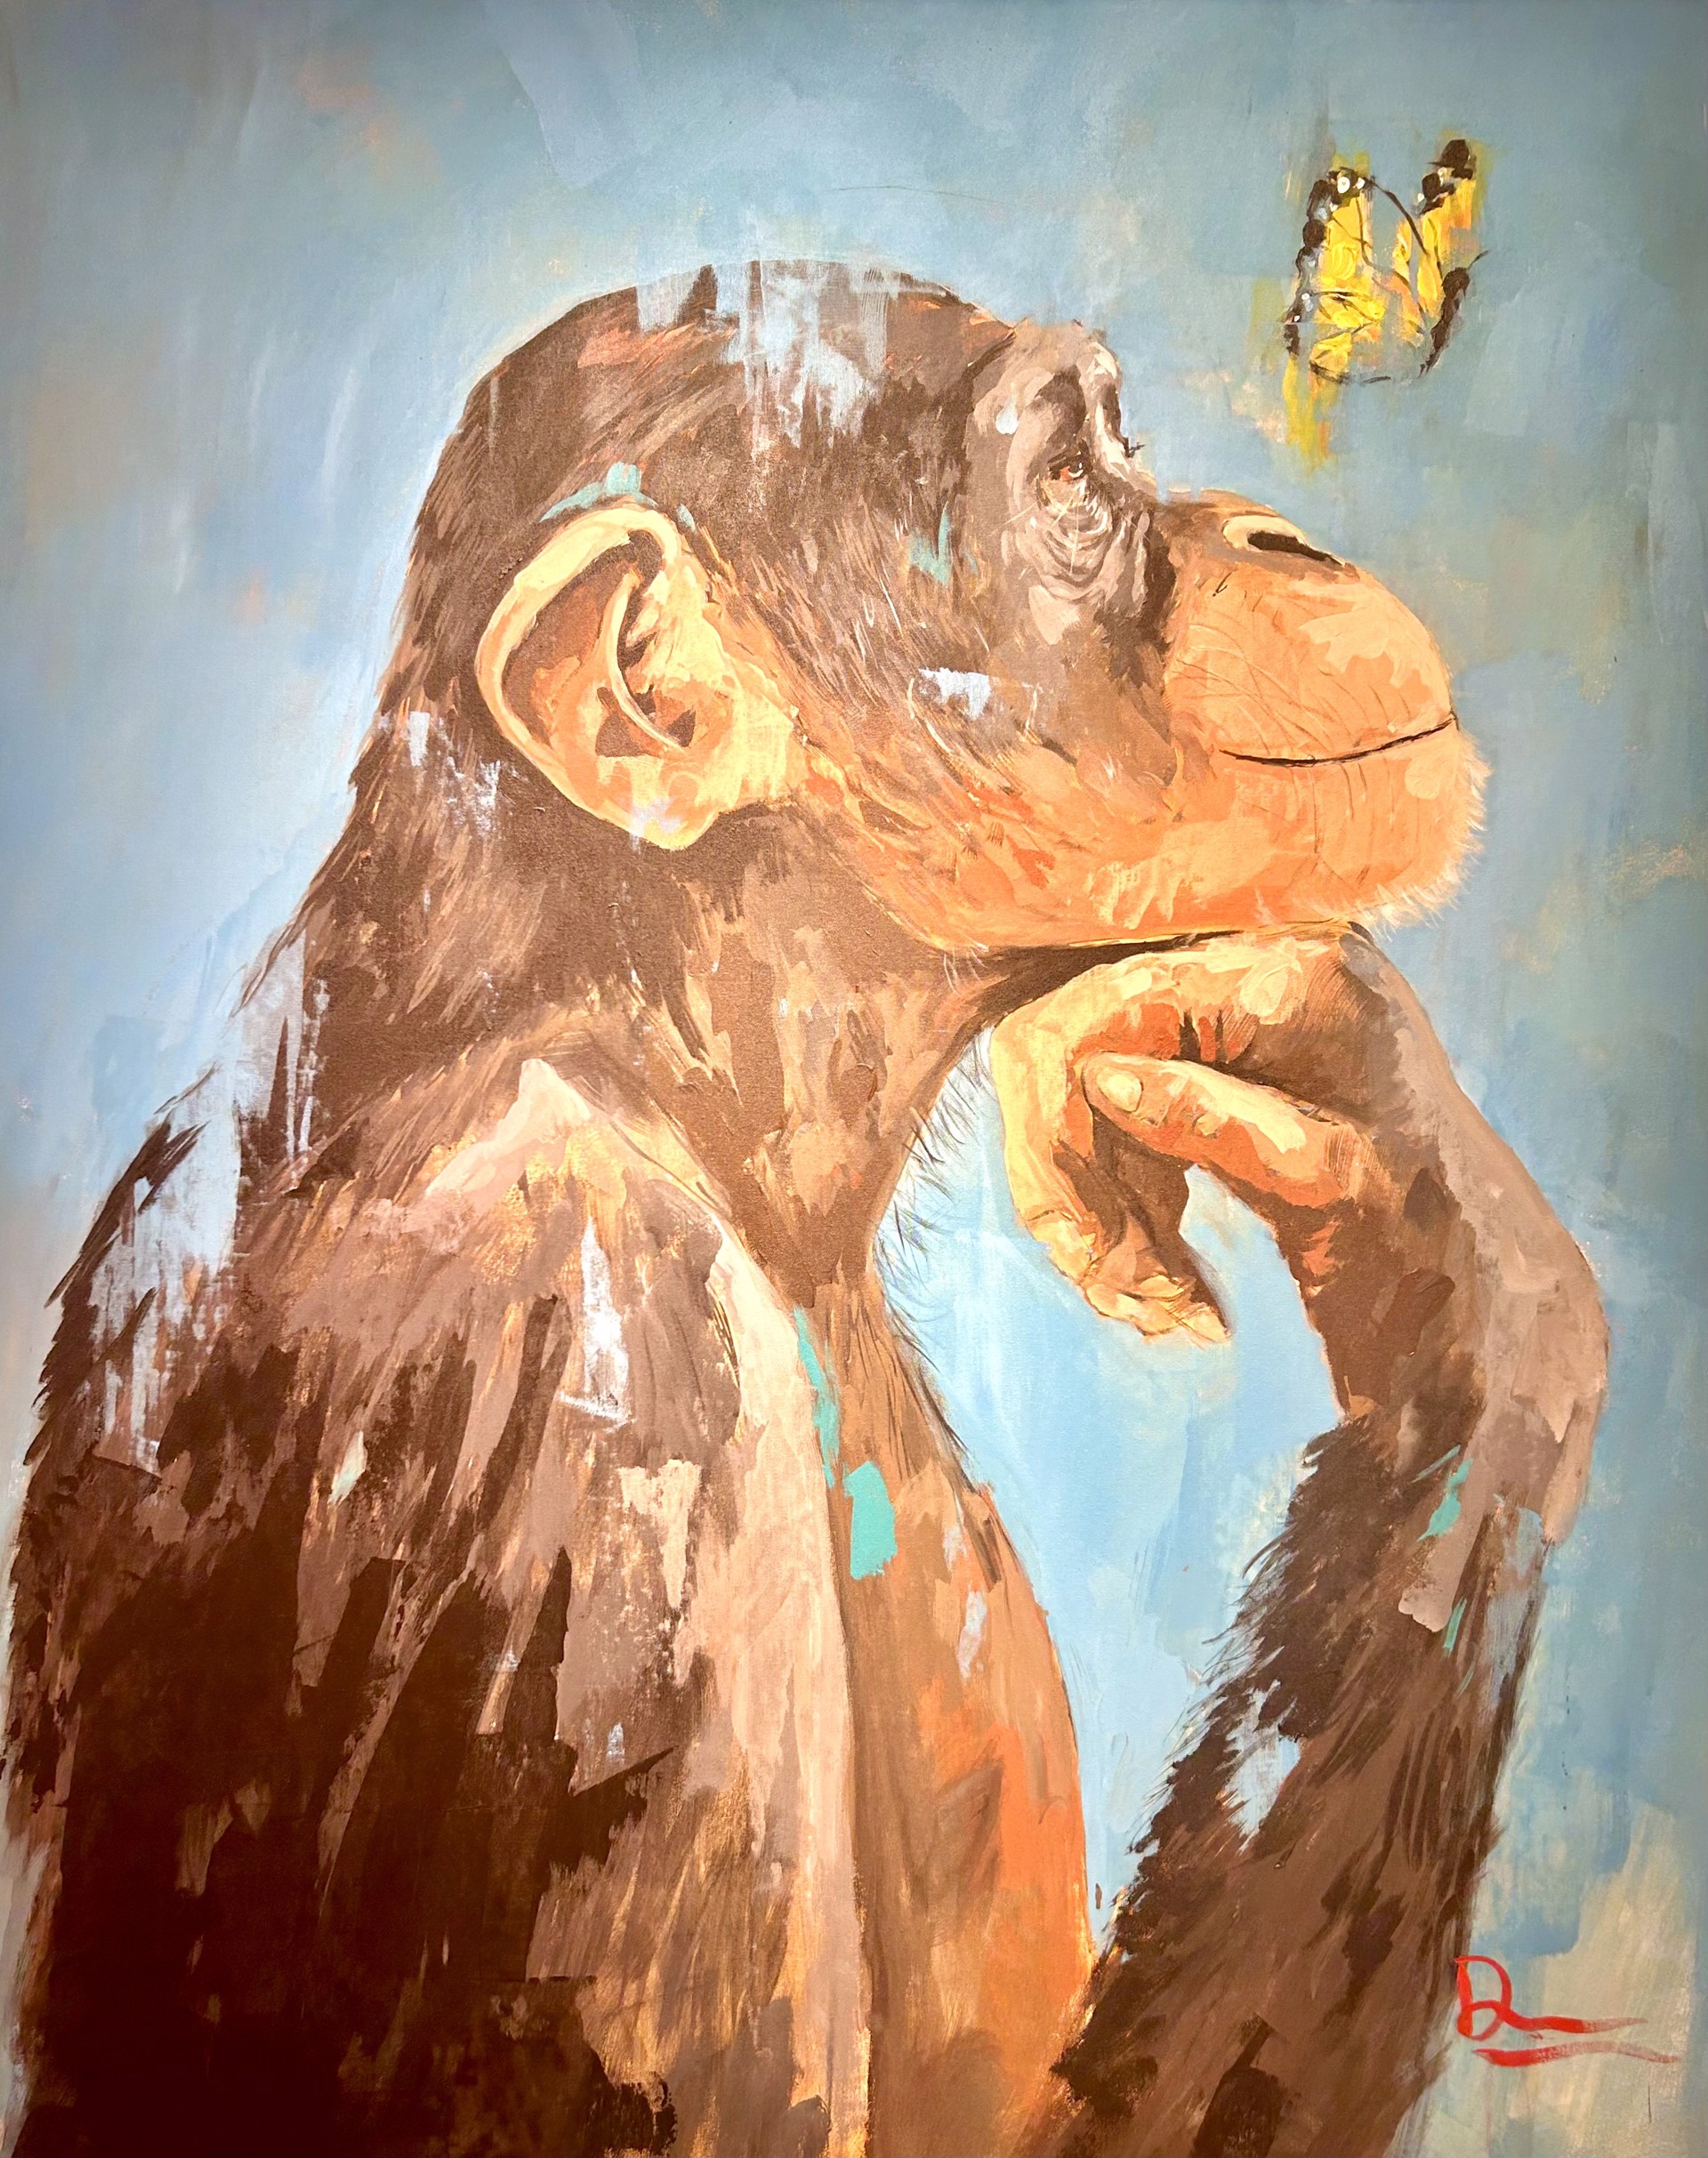 Gorilla and the Butterfly - Yellow by Dominic Mattioli